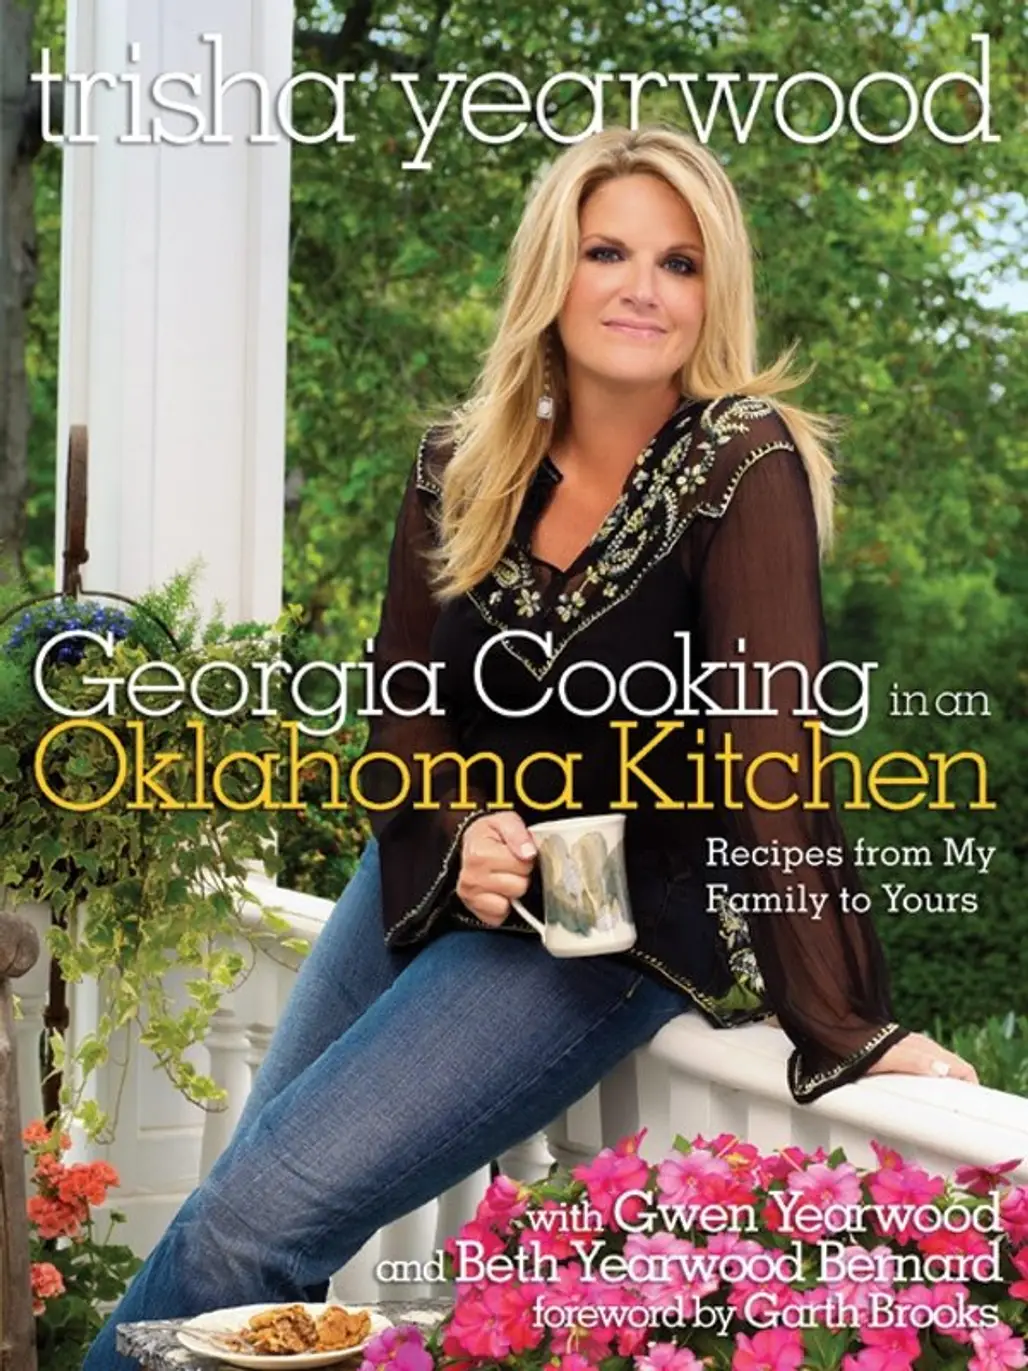 ‘Georgia Cooking in an Oklahoma Kitchen: Recipes from My Family to Yours’ by Trisha Yearwood